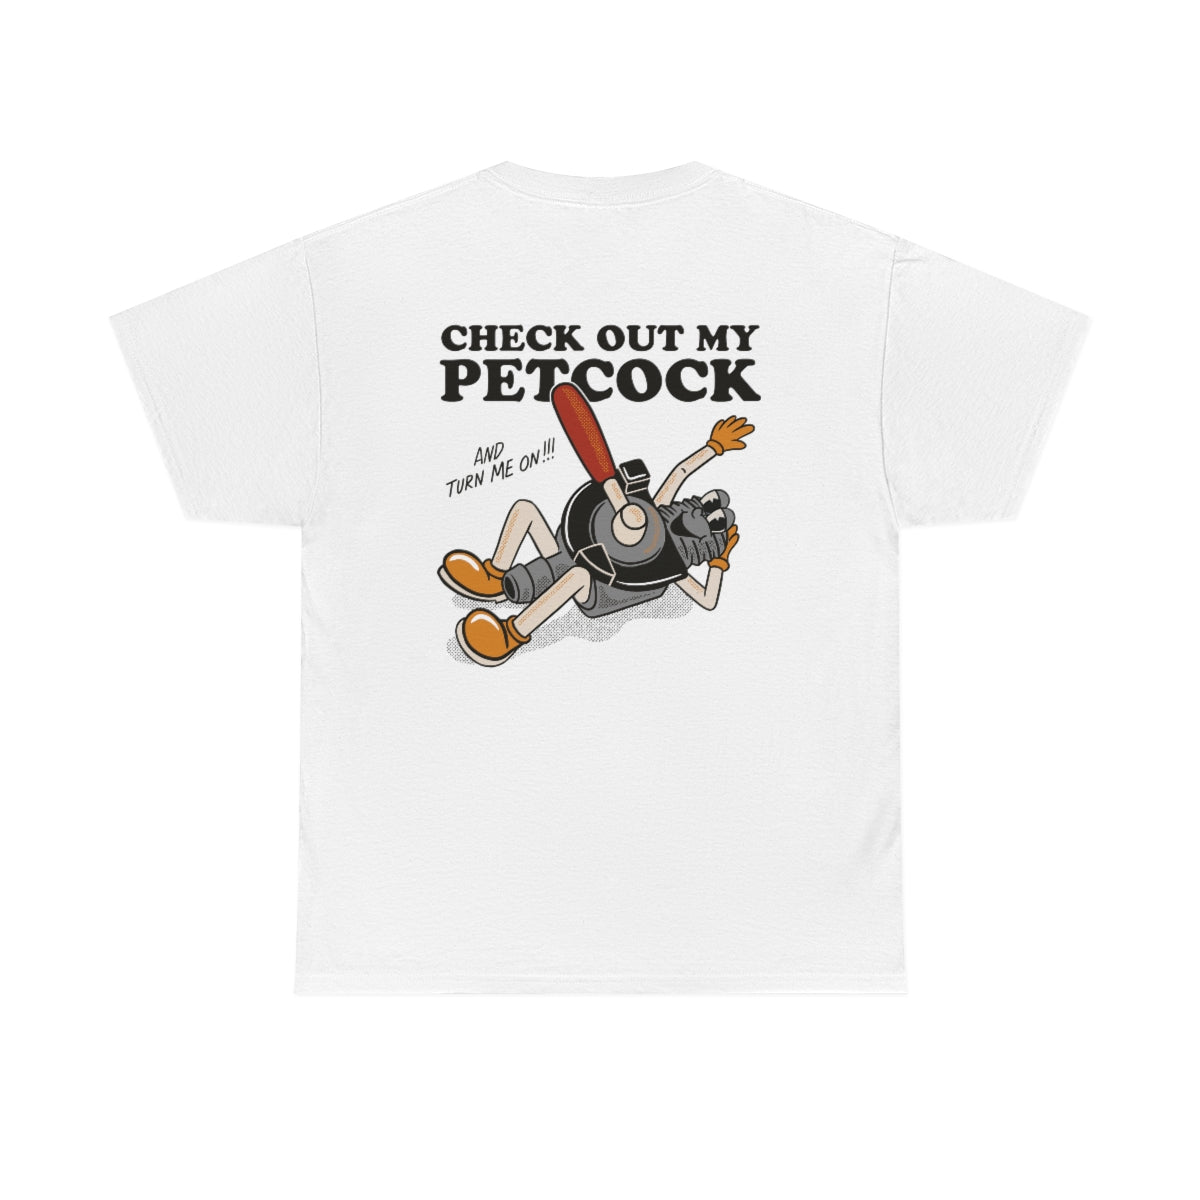 Check out my Petcock - Unisex Tee